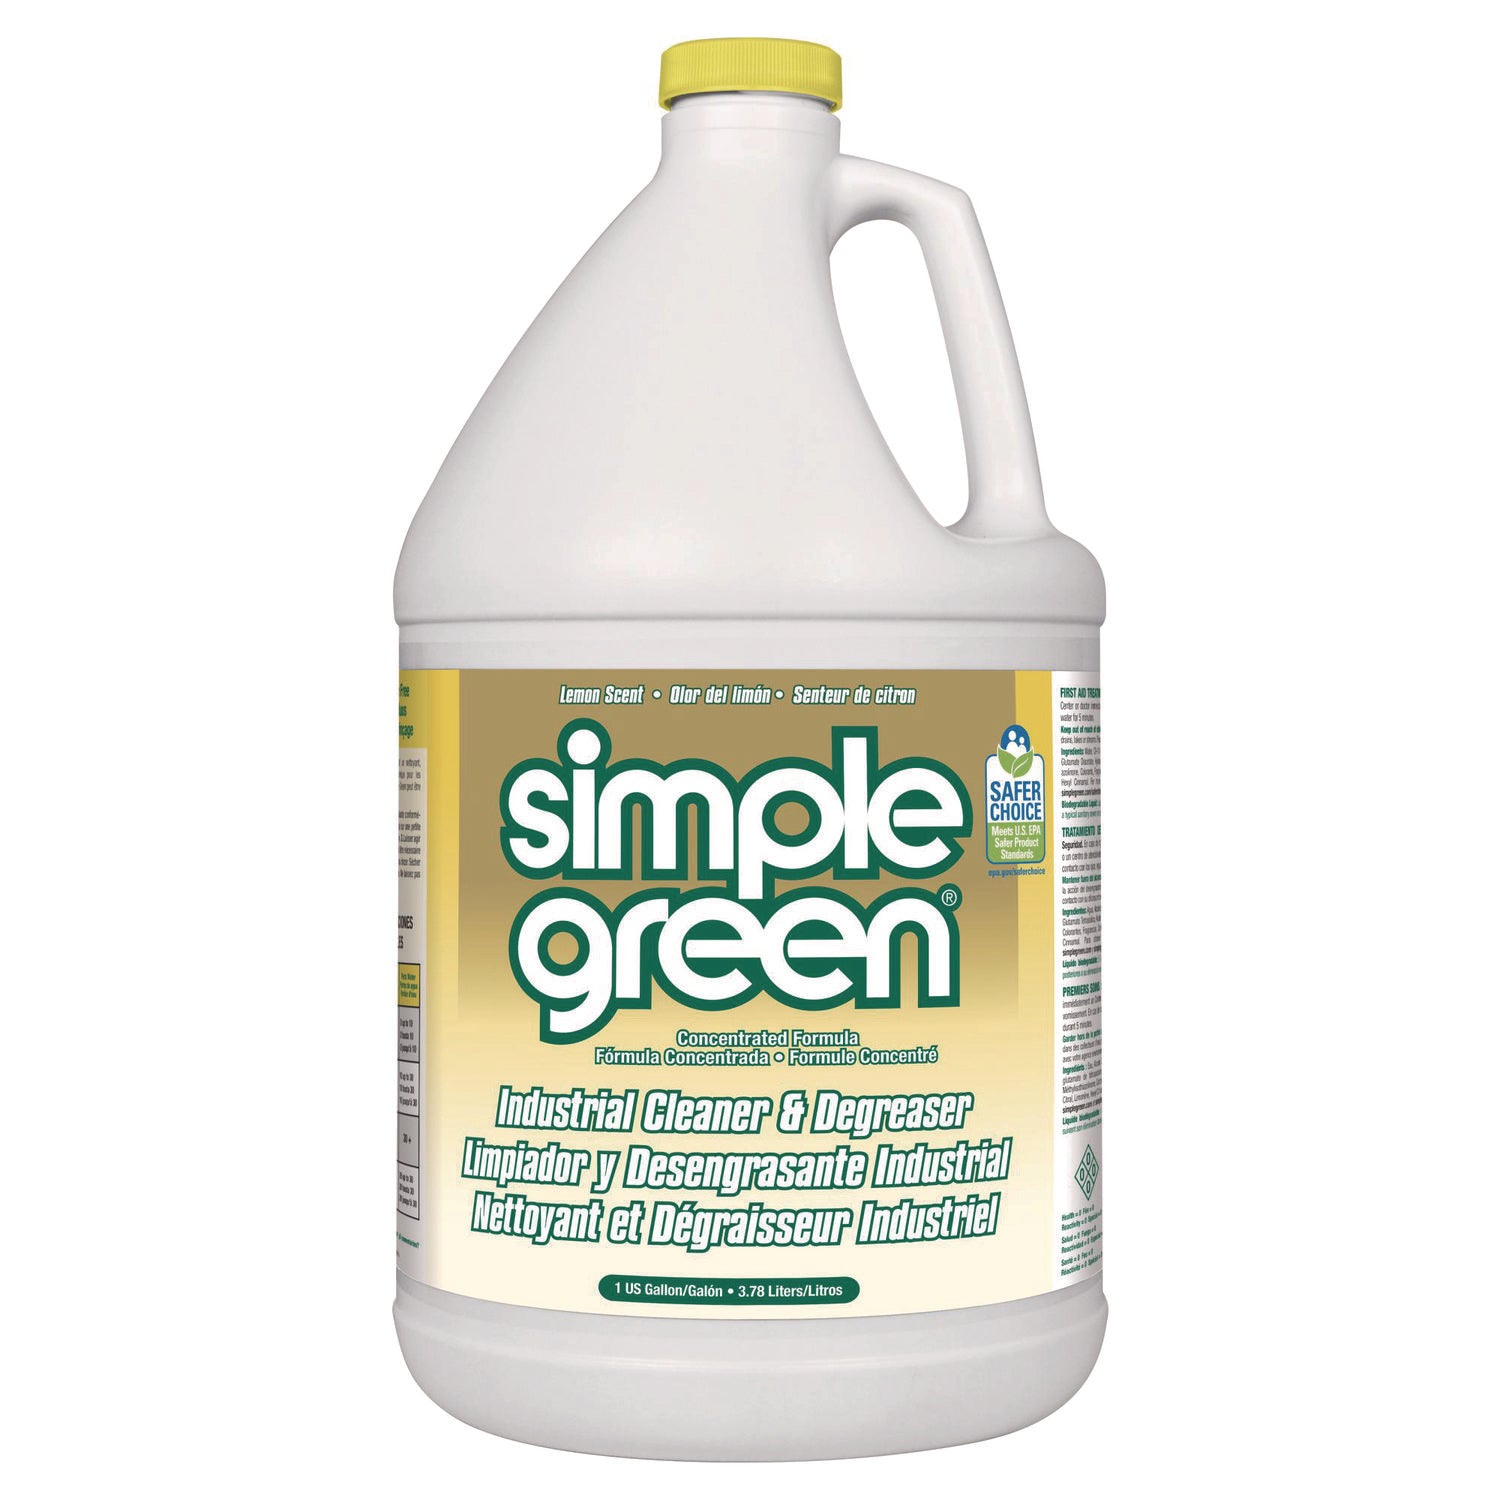 Industrial Cleaner and Degreaser, Concentrated, Lemon, 1 gal Bottle, 6/Carton - 1